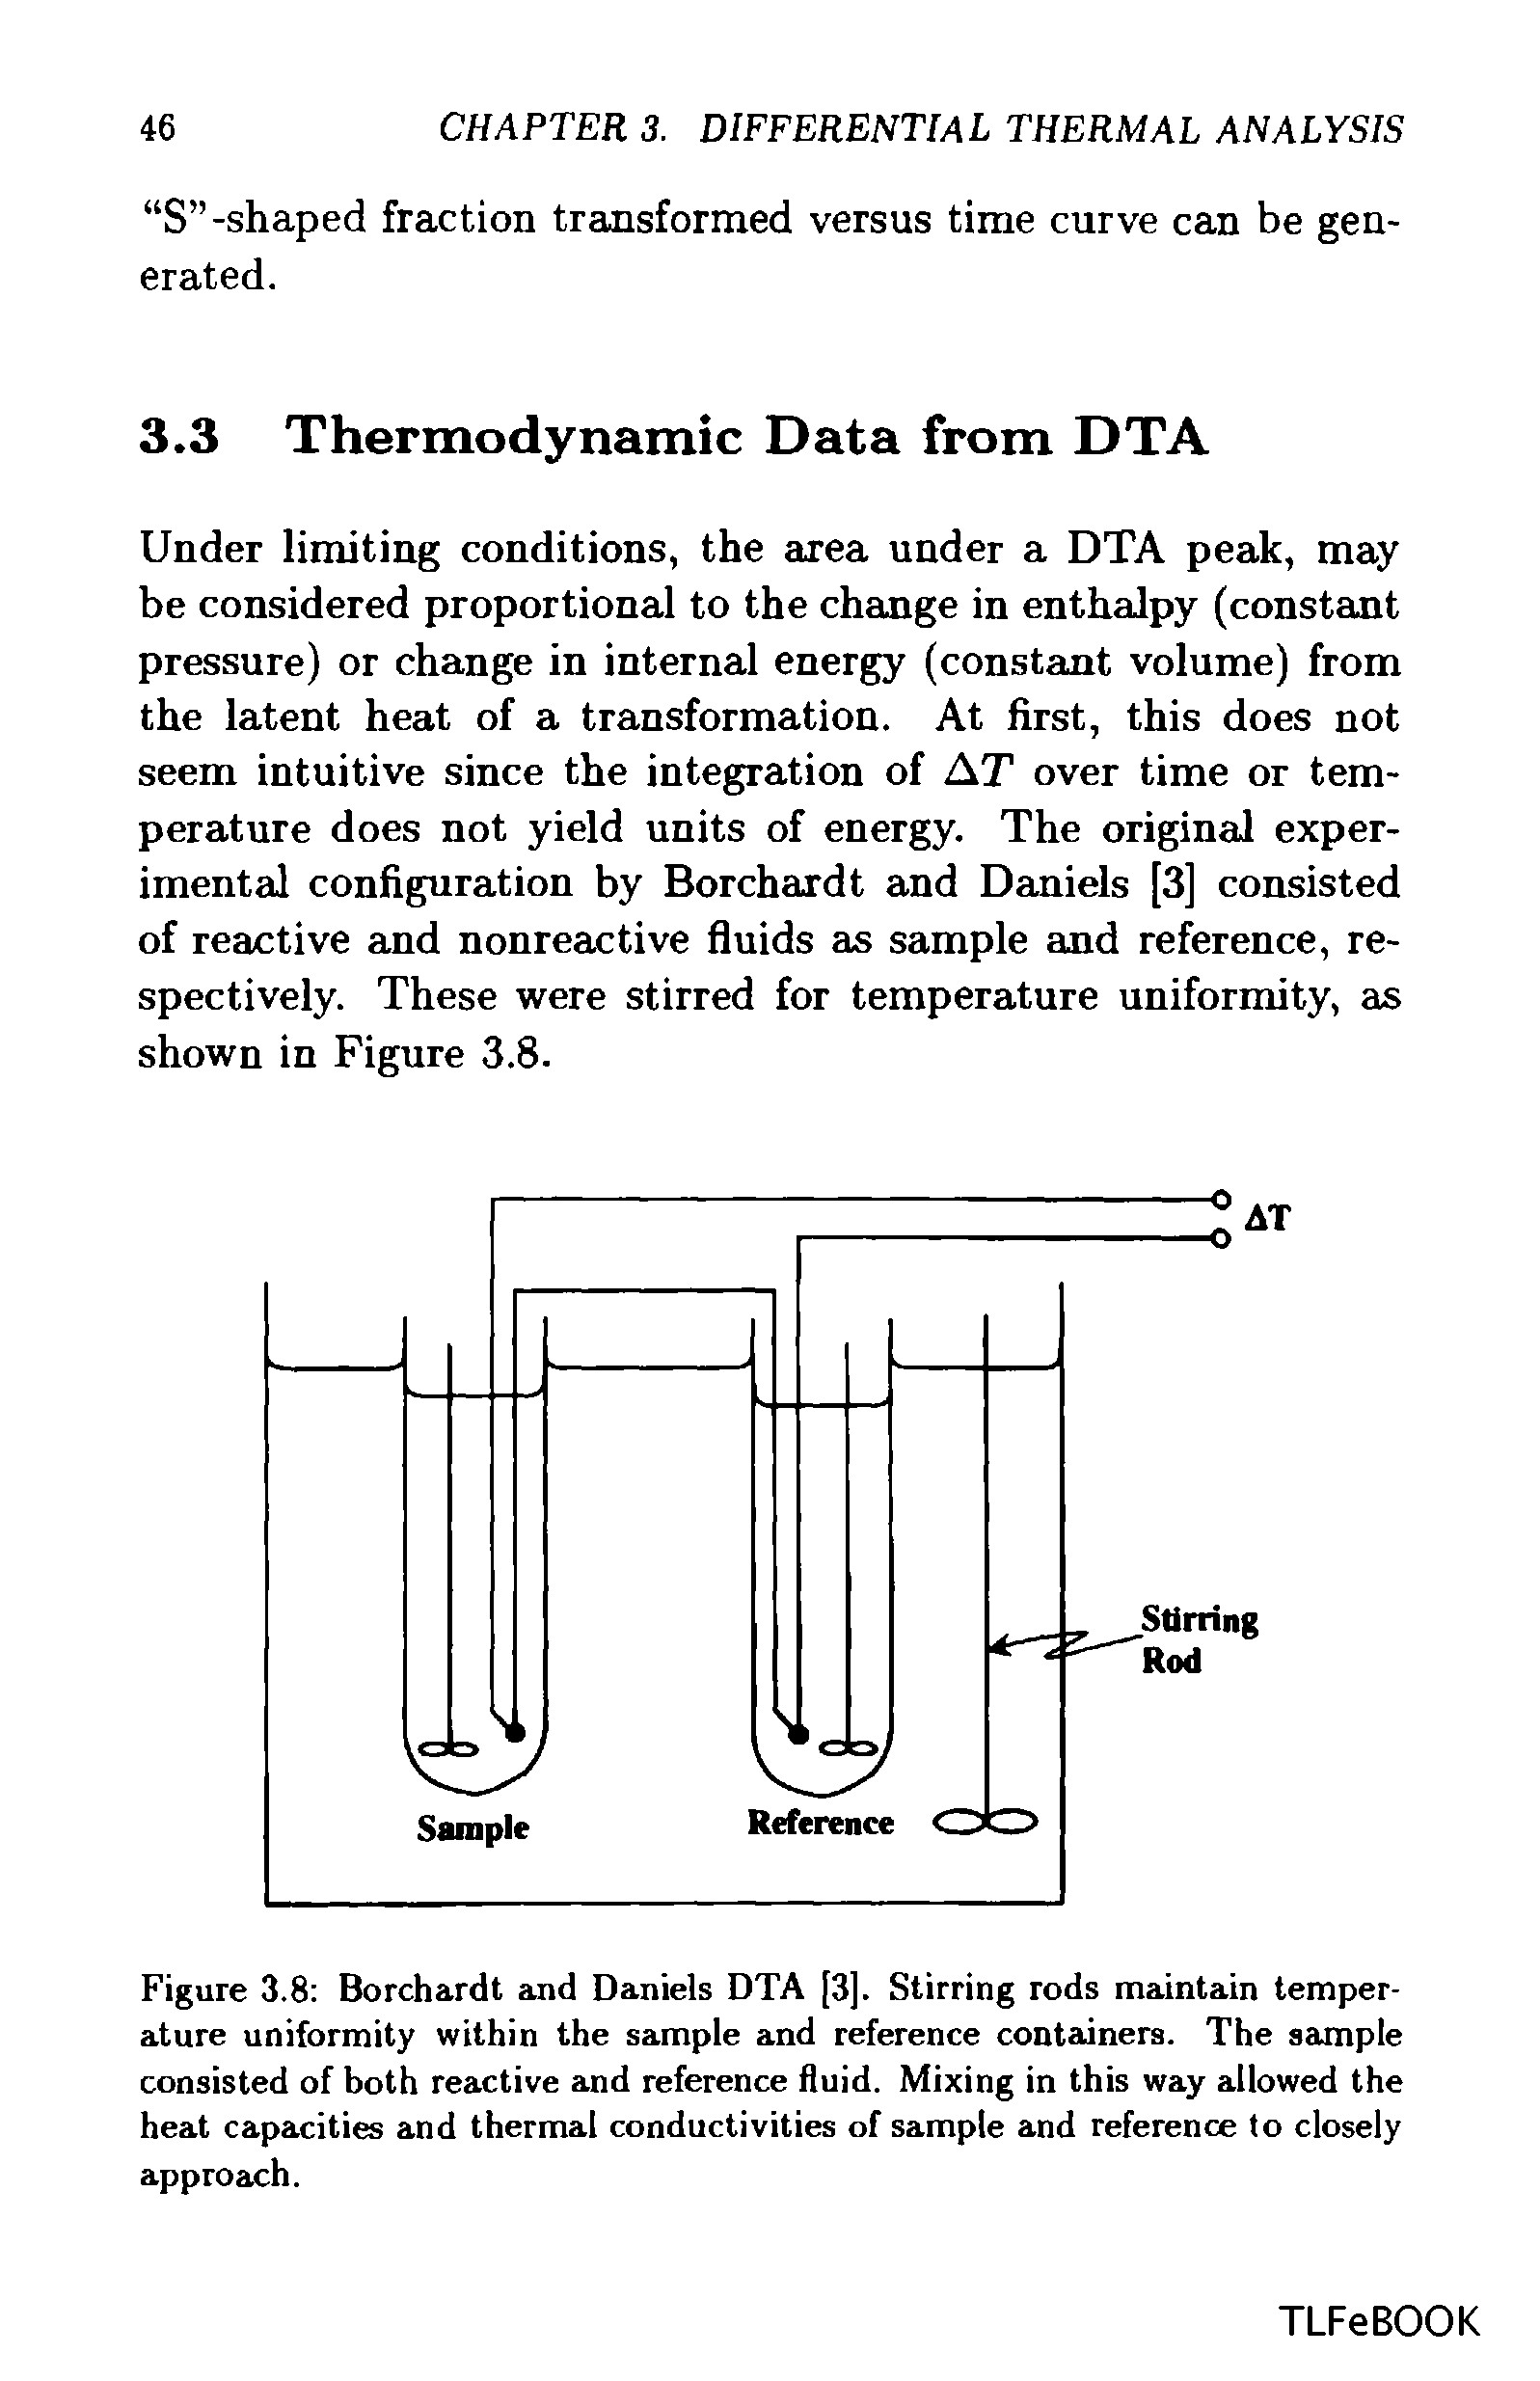 Figure 3.8 Borchardt and Daniels DTA [3]. Stirring rods maintain temperature uniformity within the sample and reference containers. The sample consisted of both reactive and reference fluid. Mixing in this way allowed the heat capacities and thermal conductivities of sample and reference to closely approach.